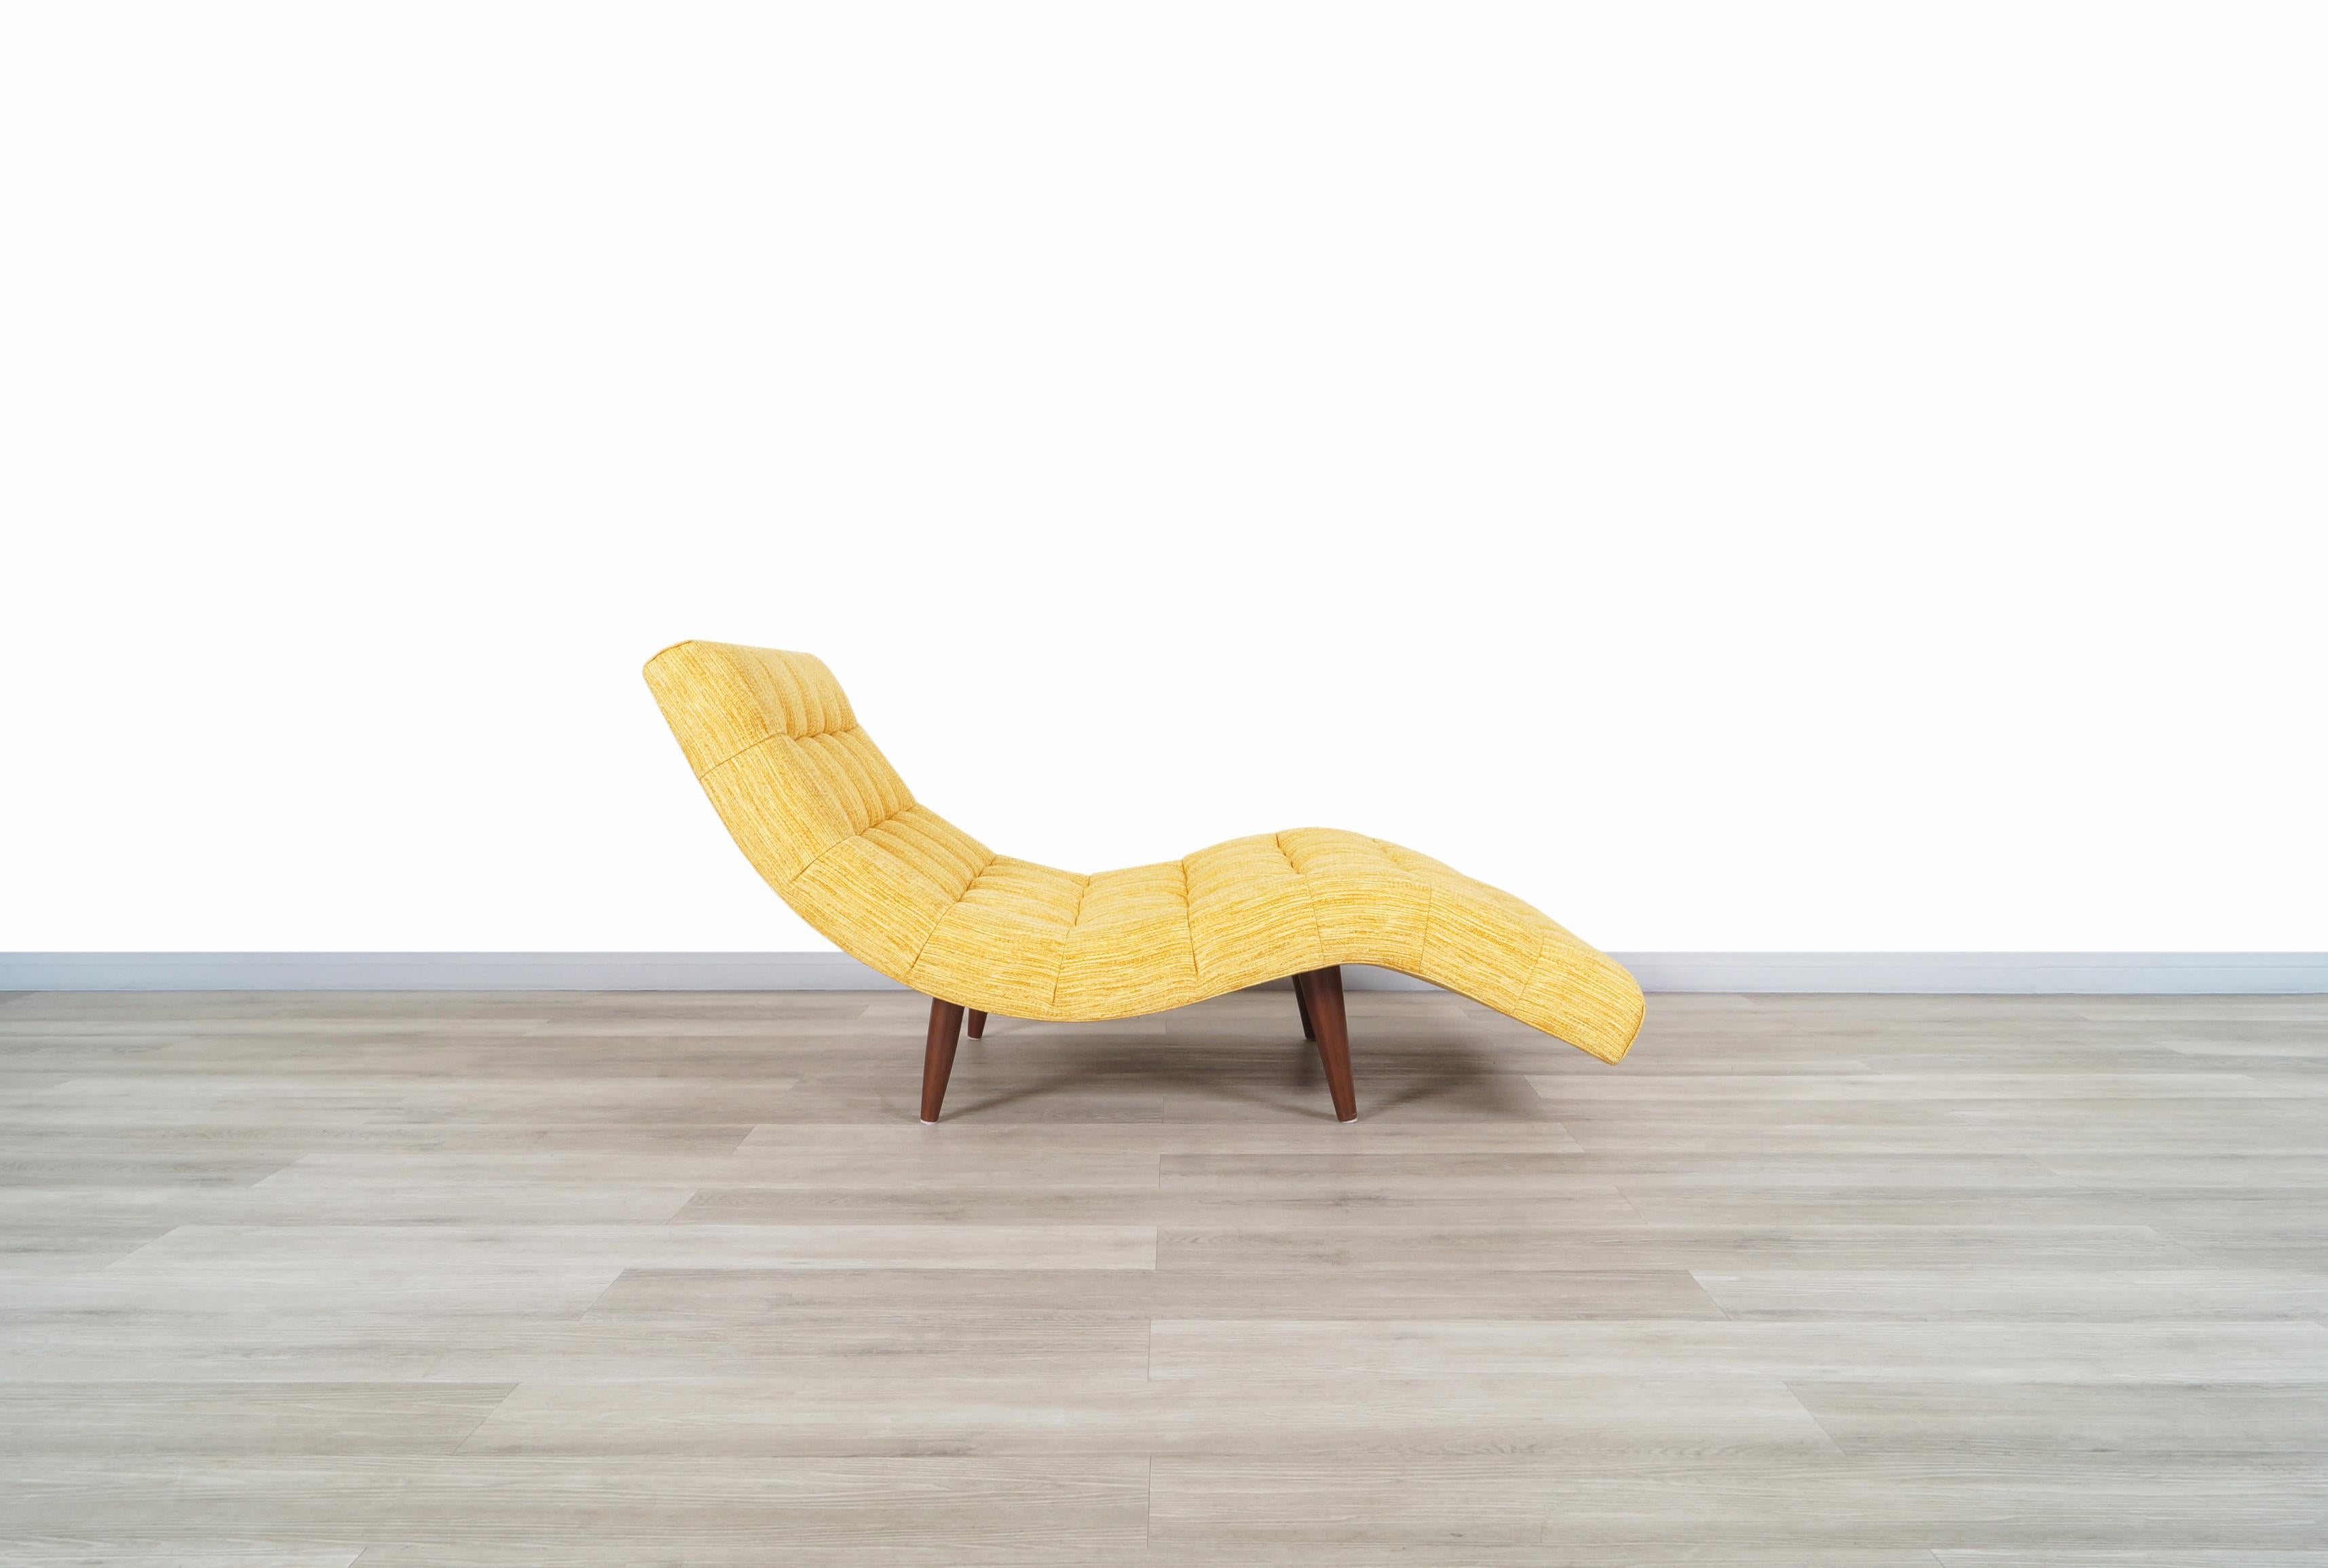 Stunning mid-century “Wave” chaise lounge chair designed by architect and furniture designer Adrian Pearsall for Craft Associates in United States, circa 1960s. This beautiful chaise lounge, also known as model 108-C, from the iconic Pearsall line